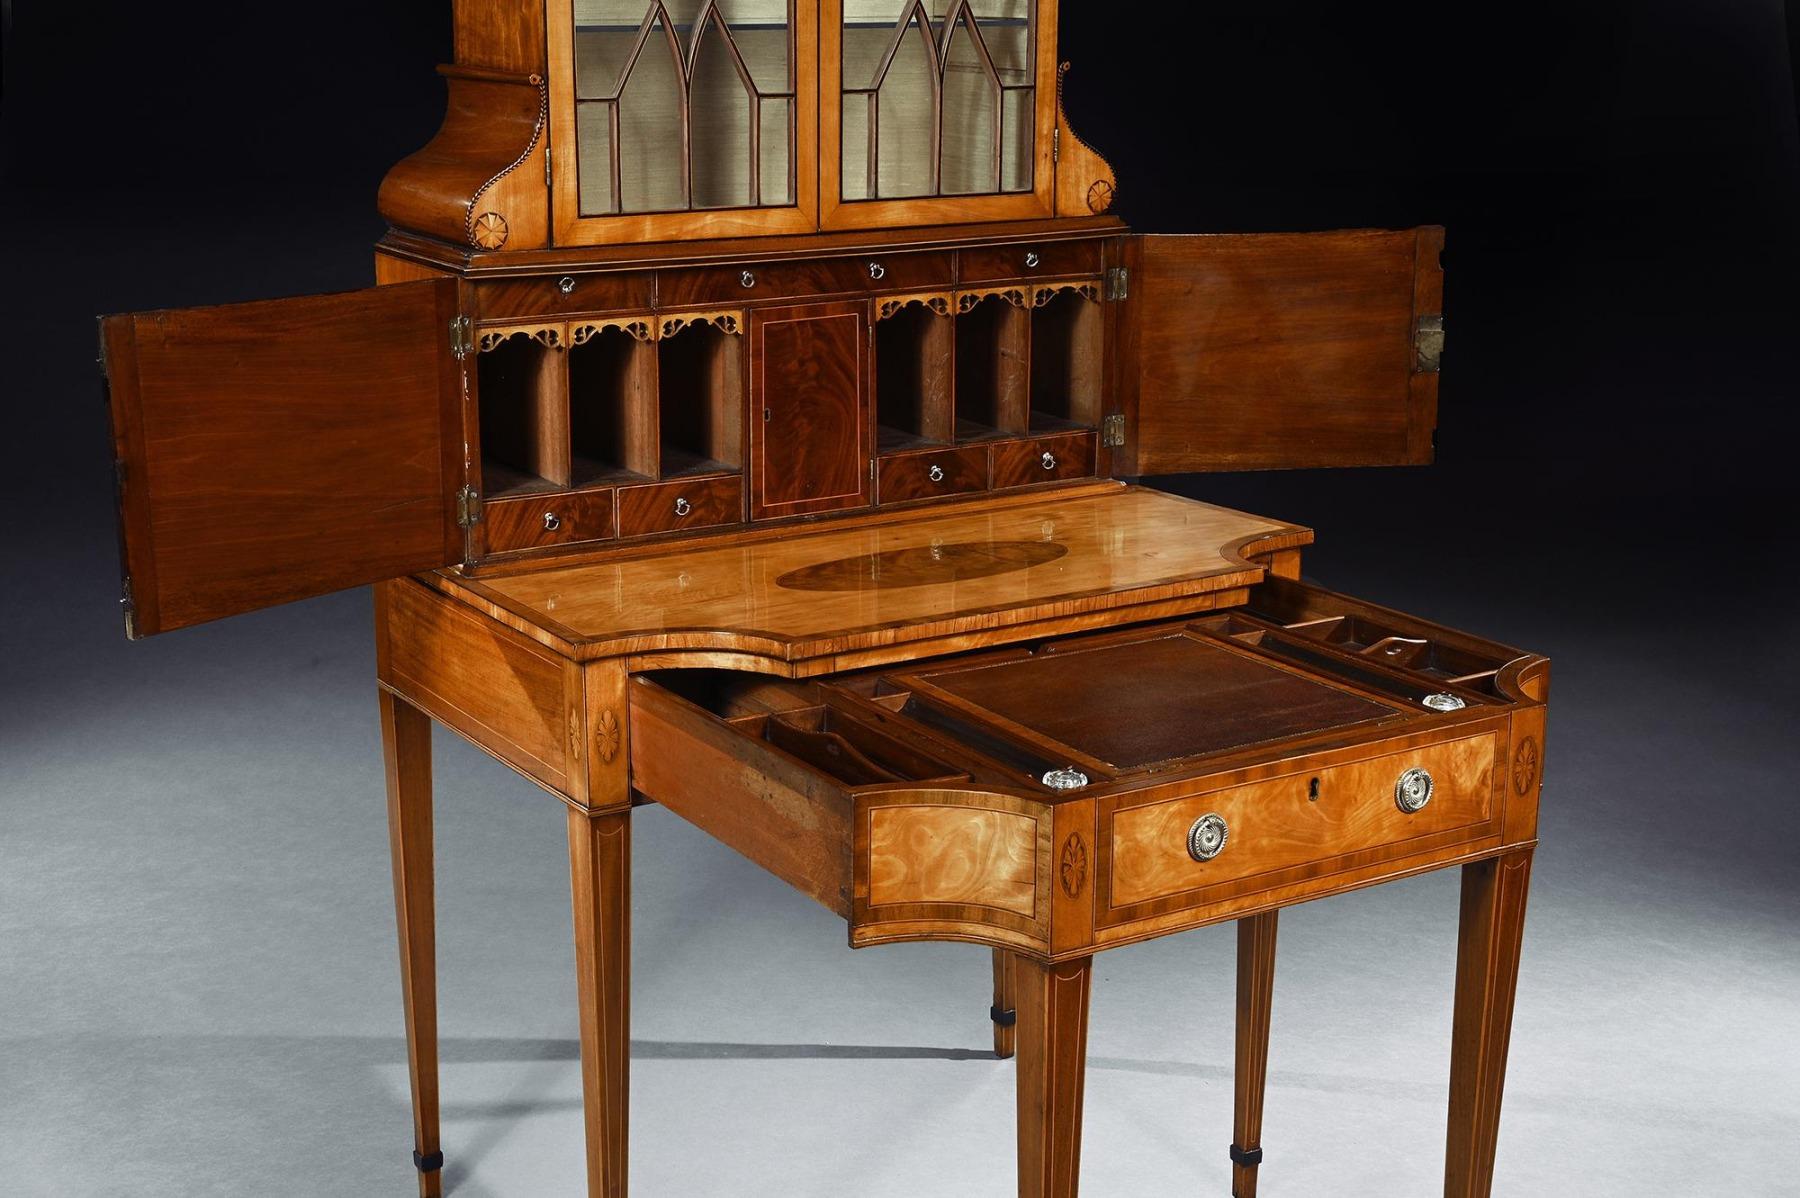  An Important 18th Century George Iii Satinwood and Sabicu Writing Cabinet For Sale 2